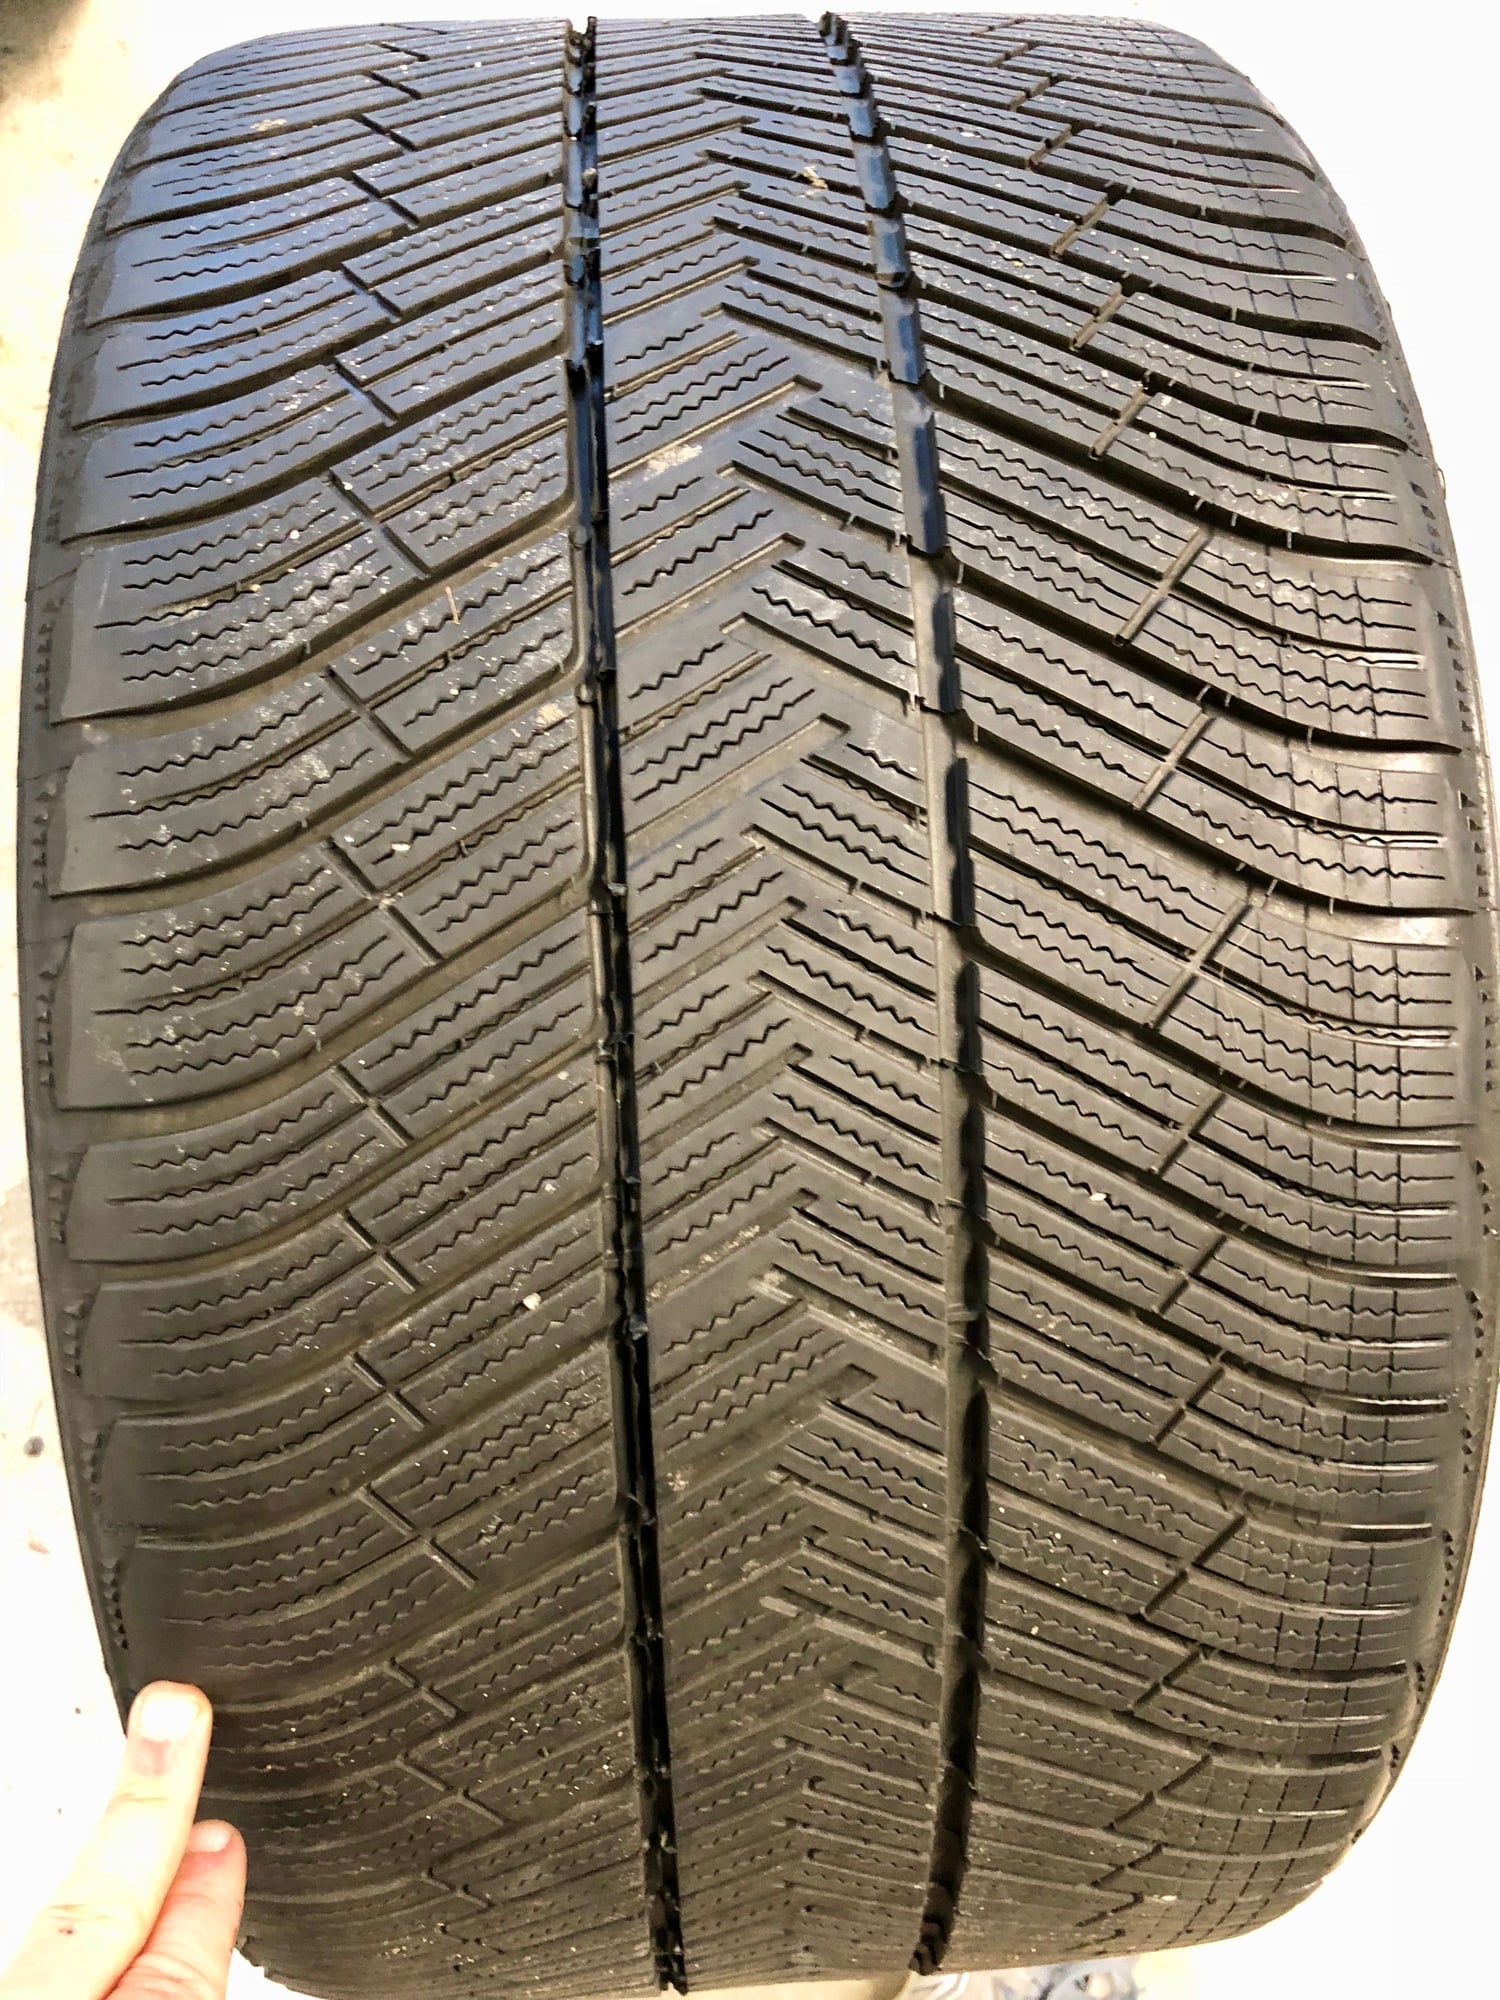 Wheels and Tires/Axles - FS -> 4 Michelin Alpins from my 991 TTS - 245/35 R20 (front) - 295/30 R 20 (rear) - Used - 2015 to 2019 Porsche 911 - Westport, CT 06612, United States